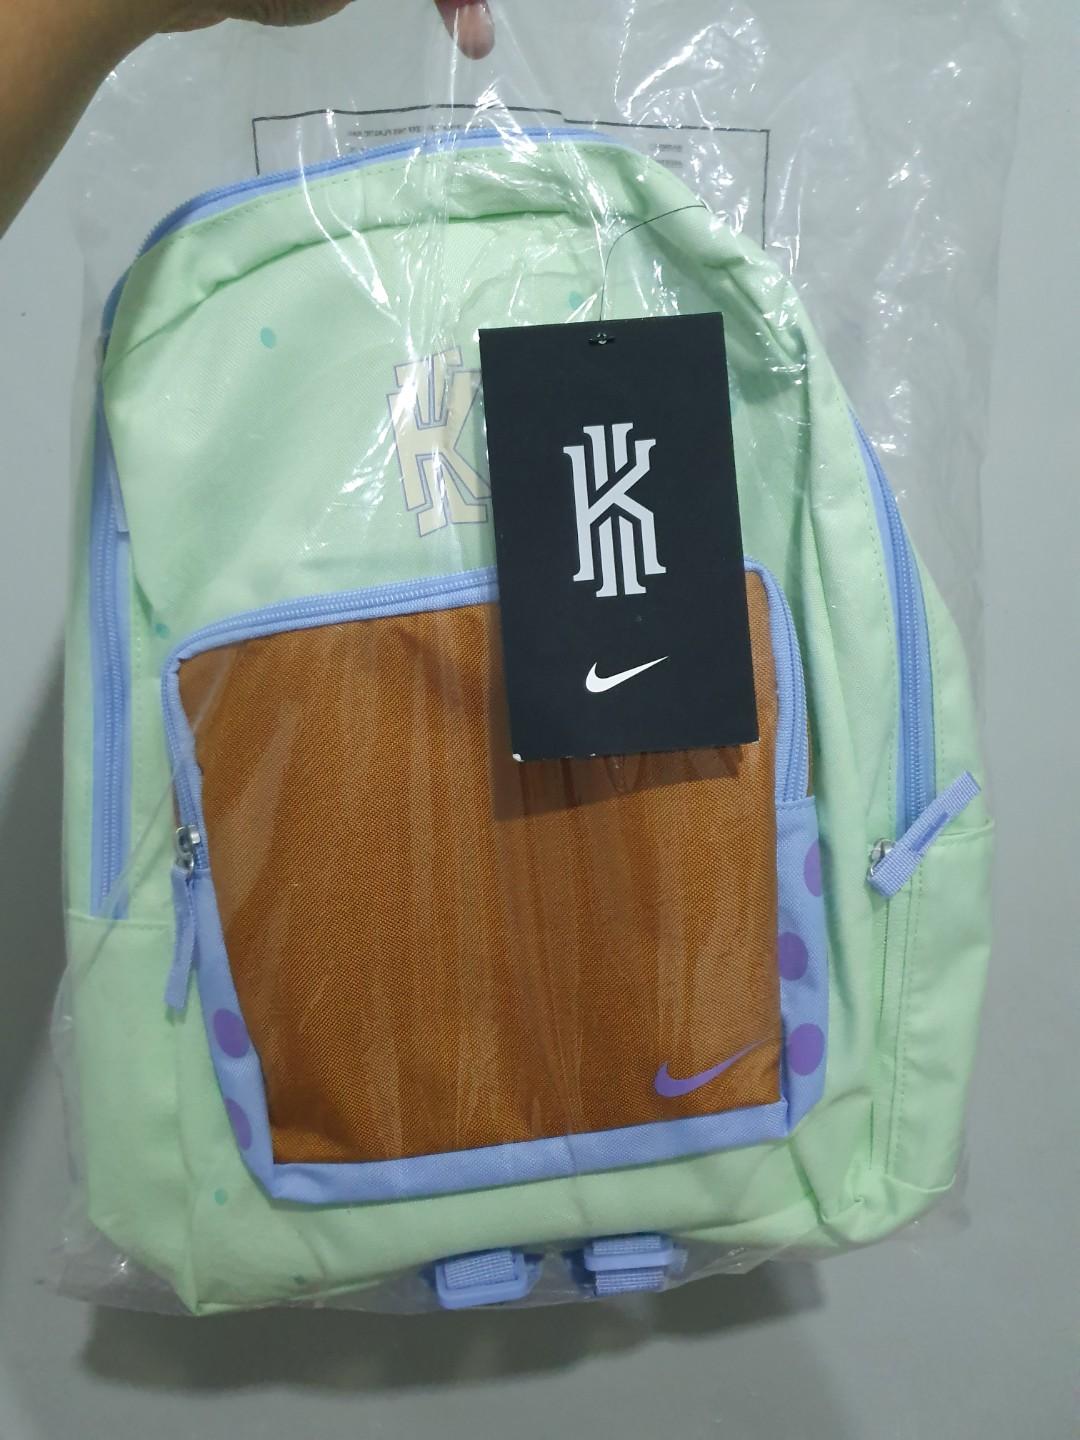 squidward kyrie backpack